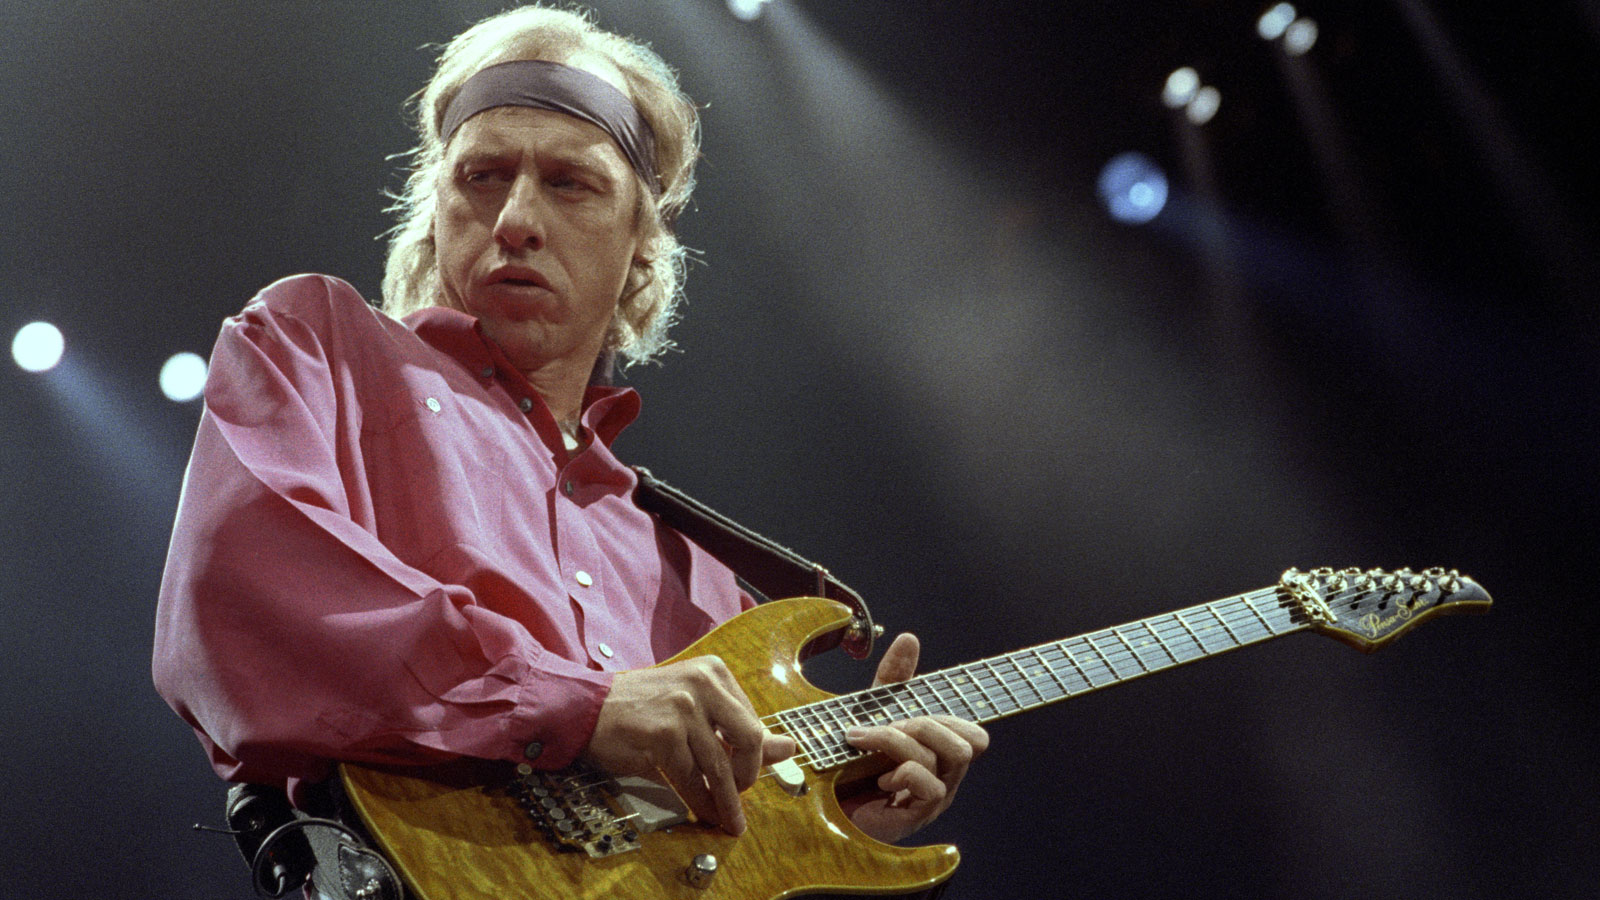 Hear Mark Knopfler’s isolated guitar solo on Sultans Of Swing